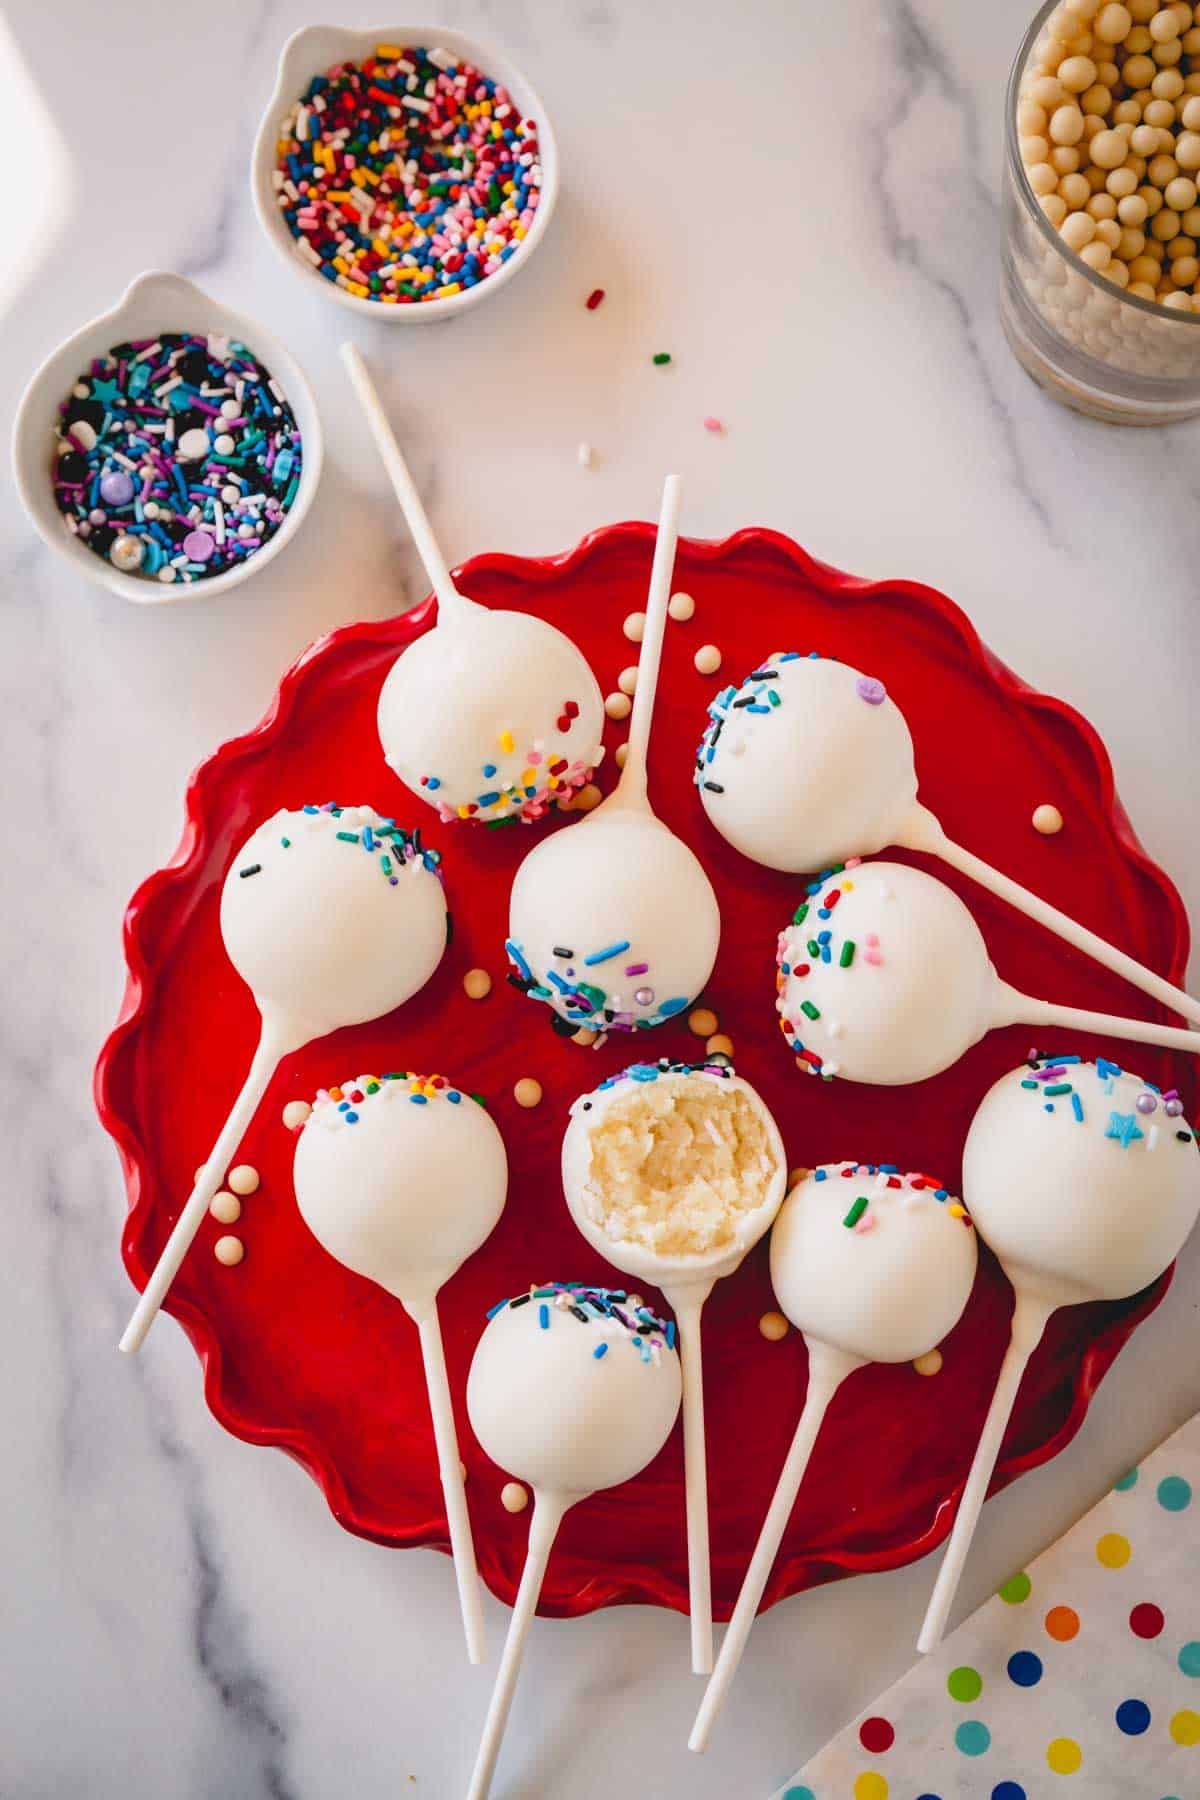 Cake pops with sprinkles on a red plate.